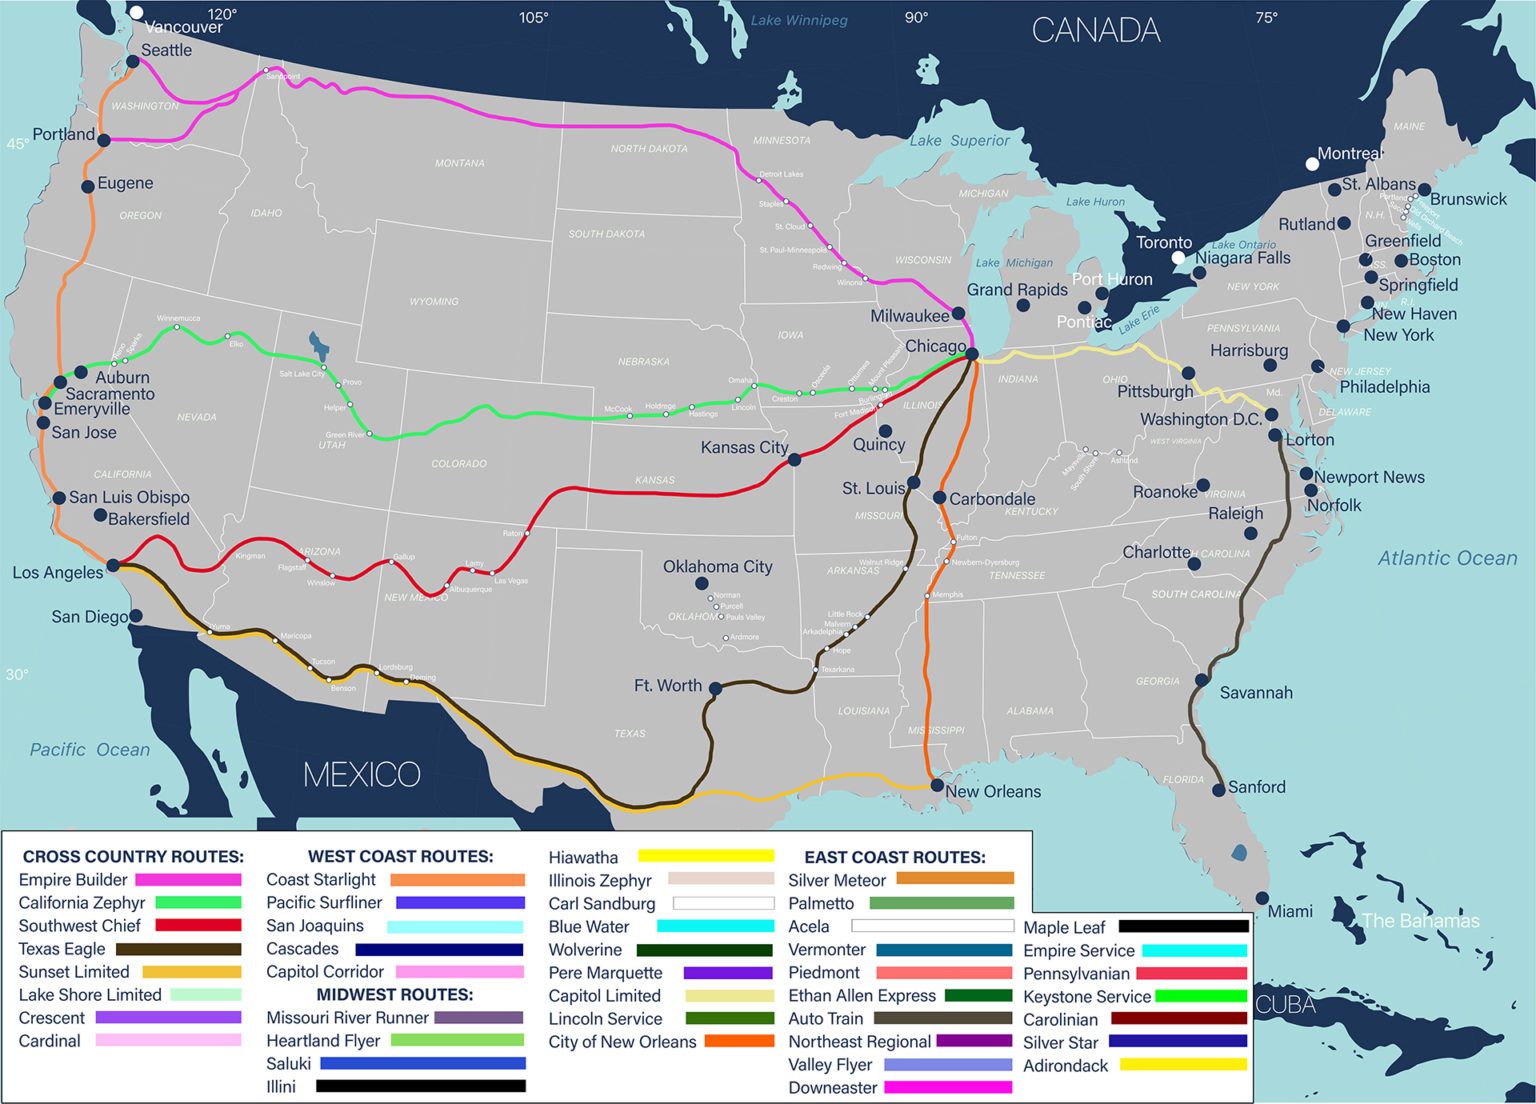 Amtrak Superliner Sleeper Car Route Map and Review Grounded Life Travel